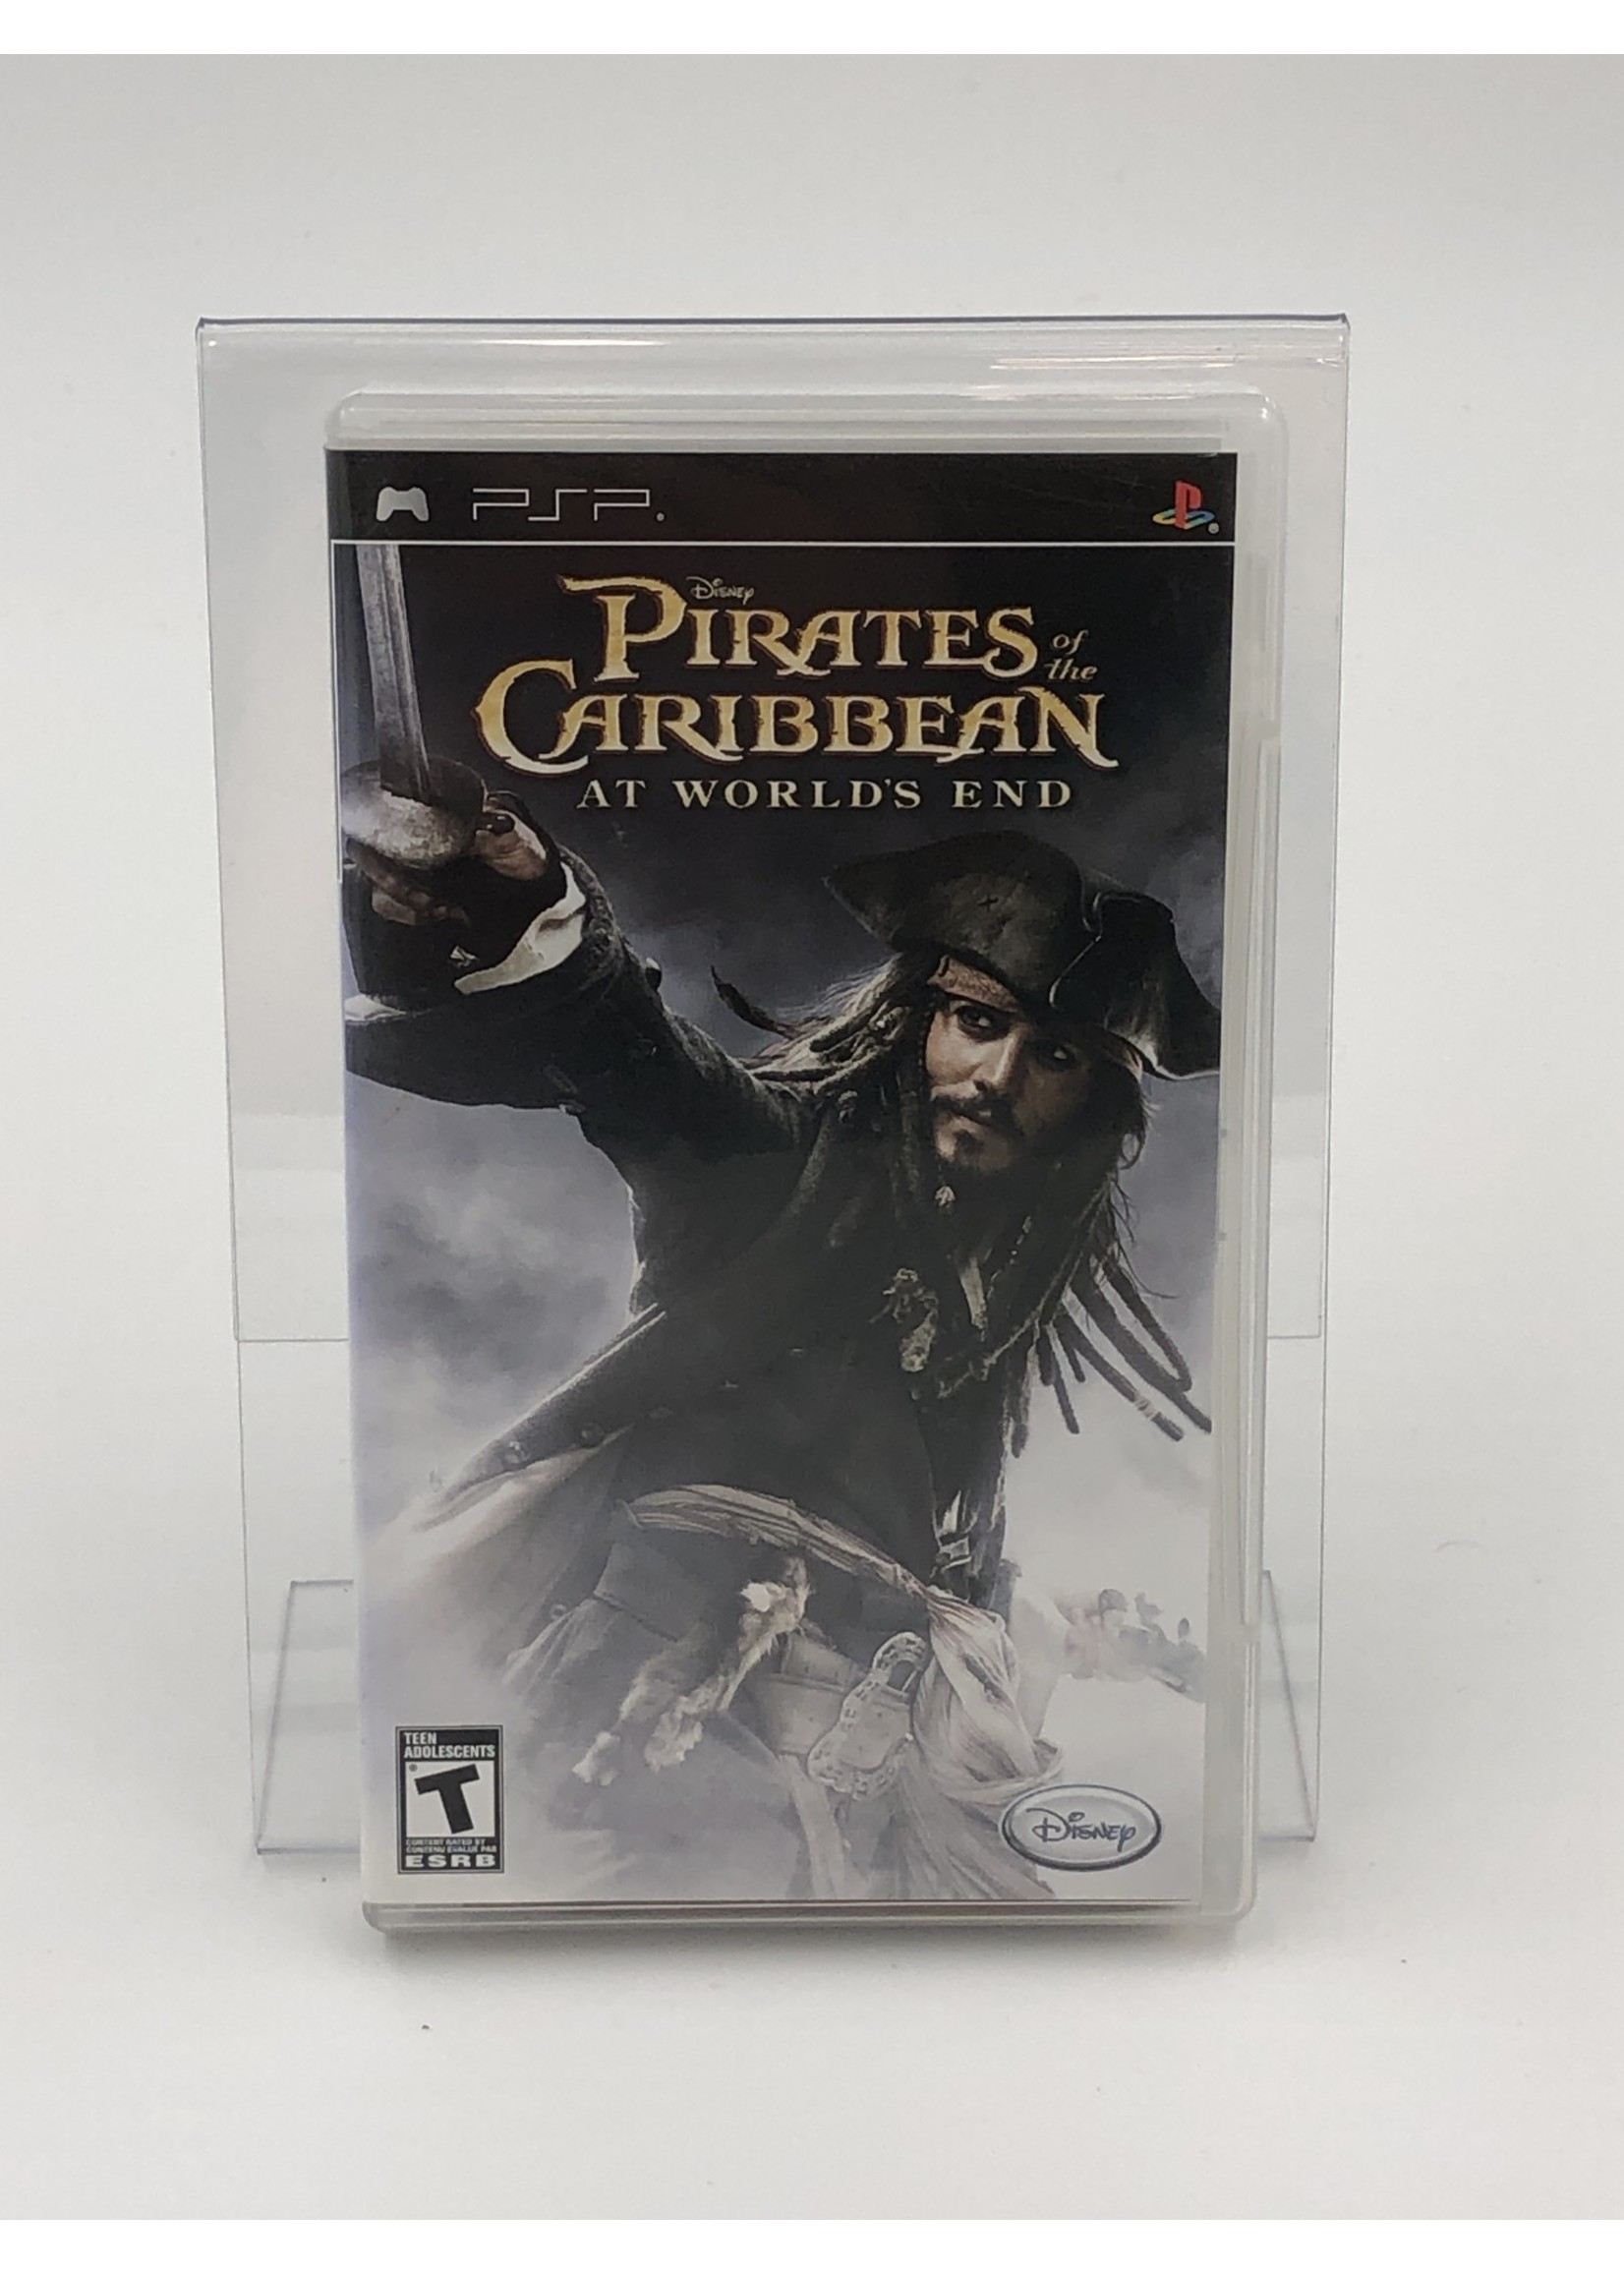 Sony   DIsney Pirates of the Caribbean: At World's End - PSP